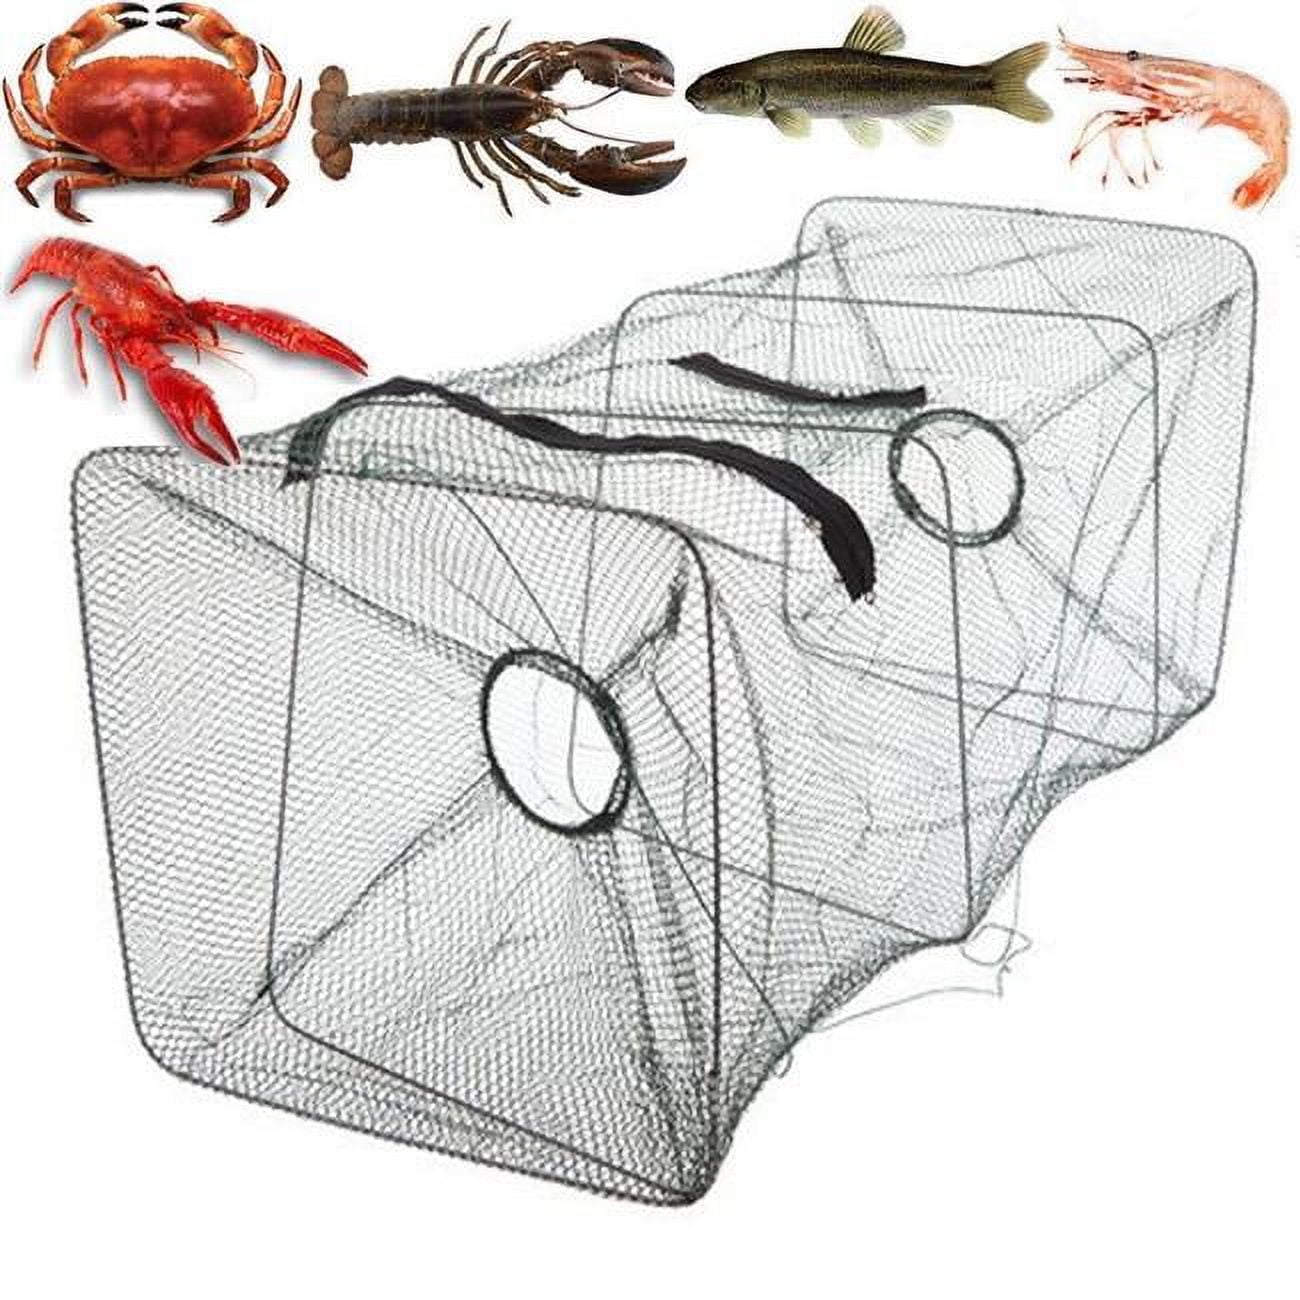 Portable Foldable Fishing Net Trap for Kids, 2 Pack Small Size Folded Crab  Cast Dip Bait Cage with Large Entrance for Smelt, Crab, and Shrimp